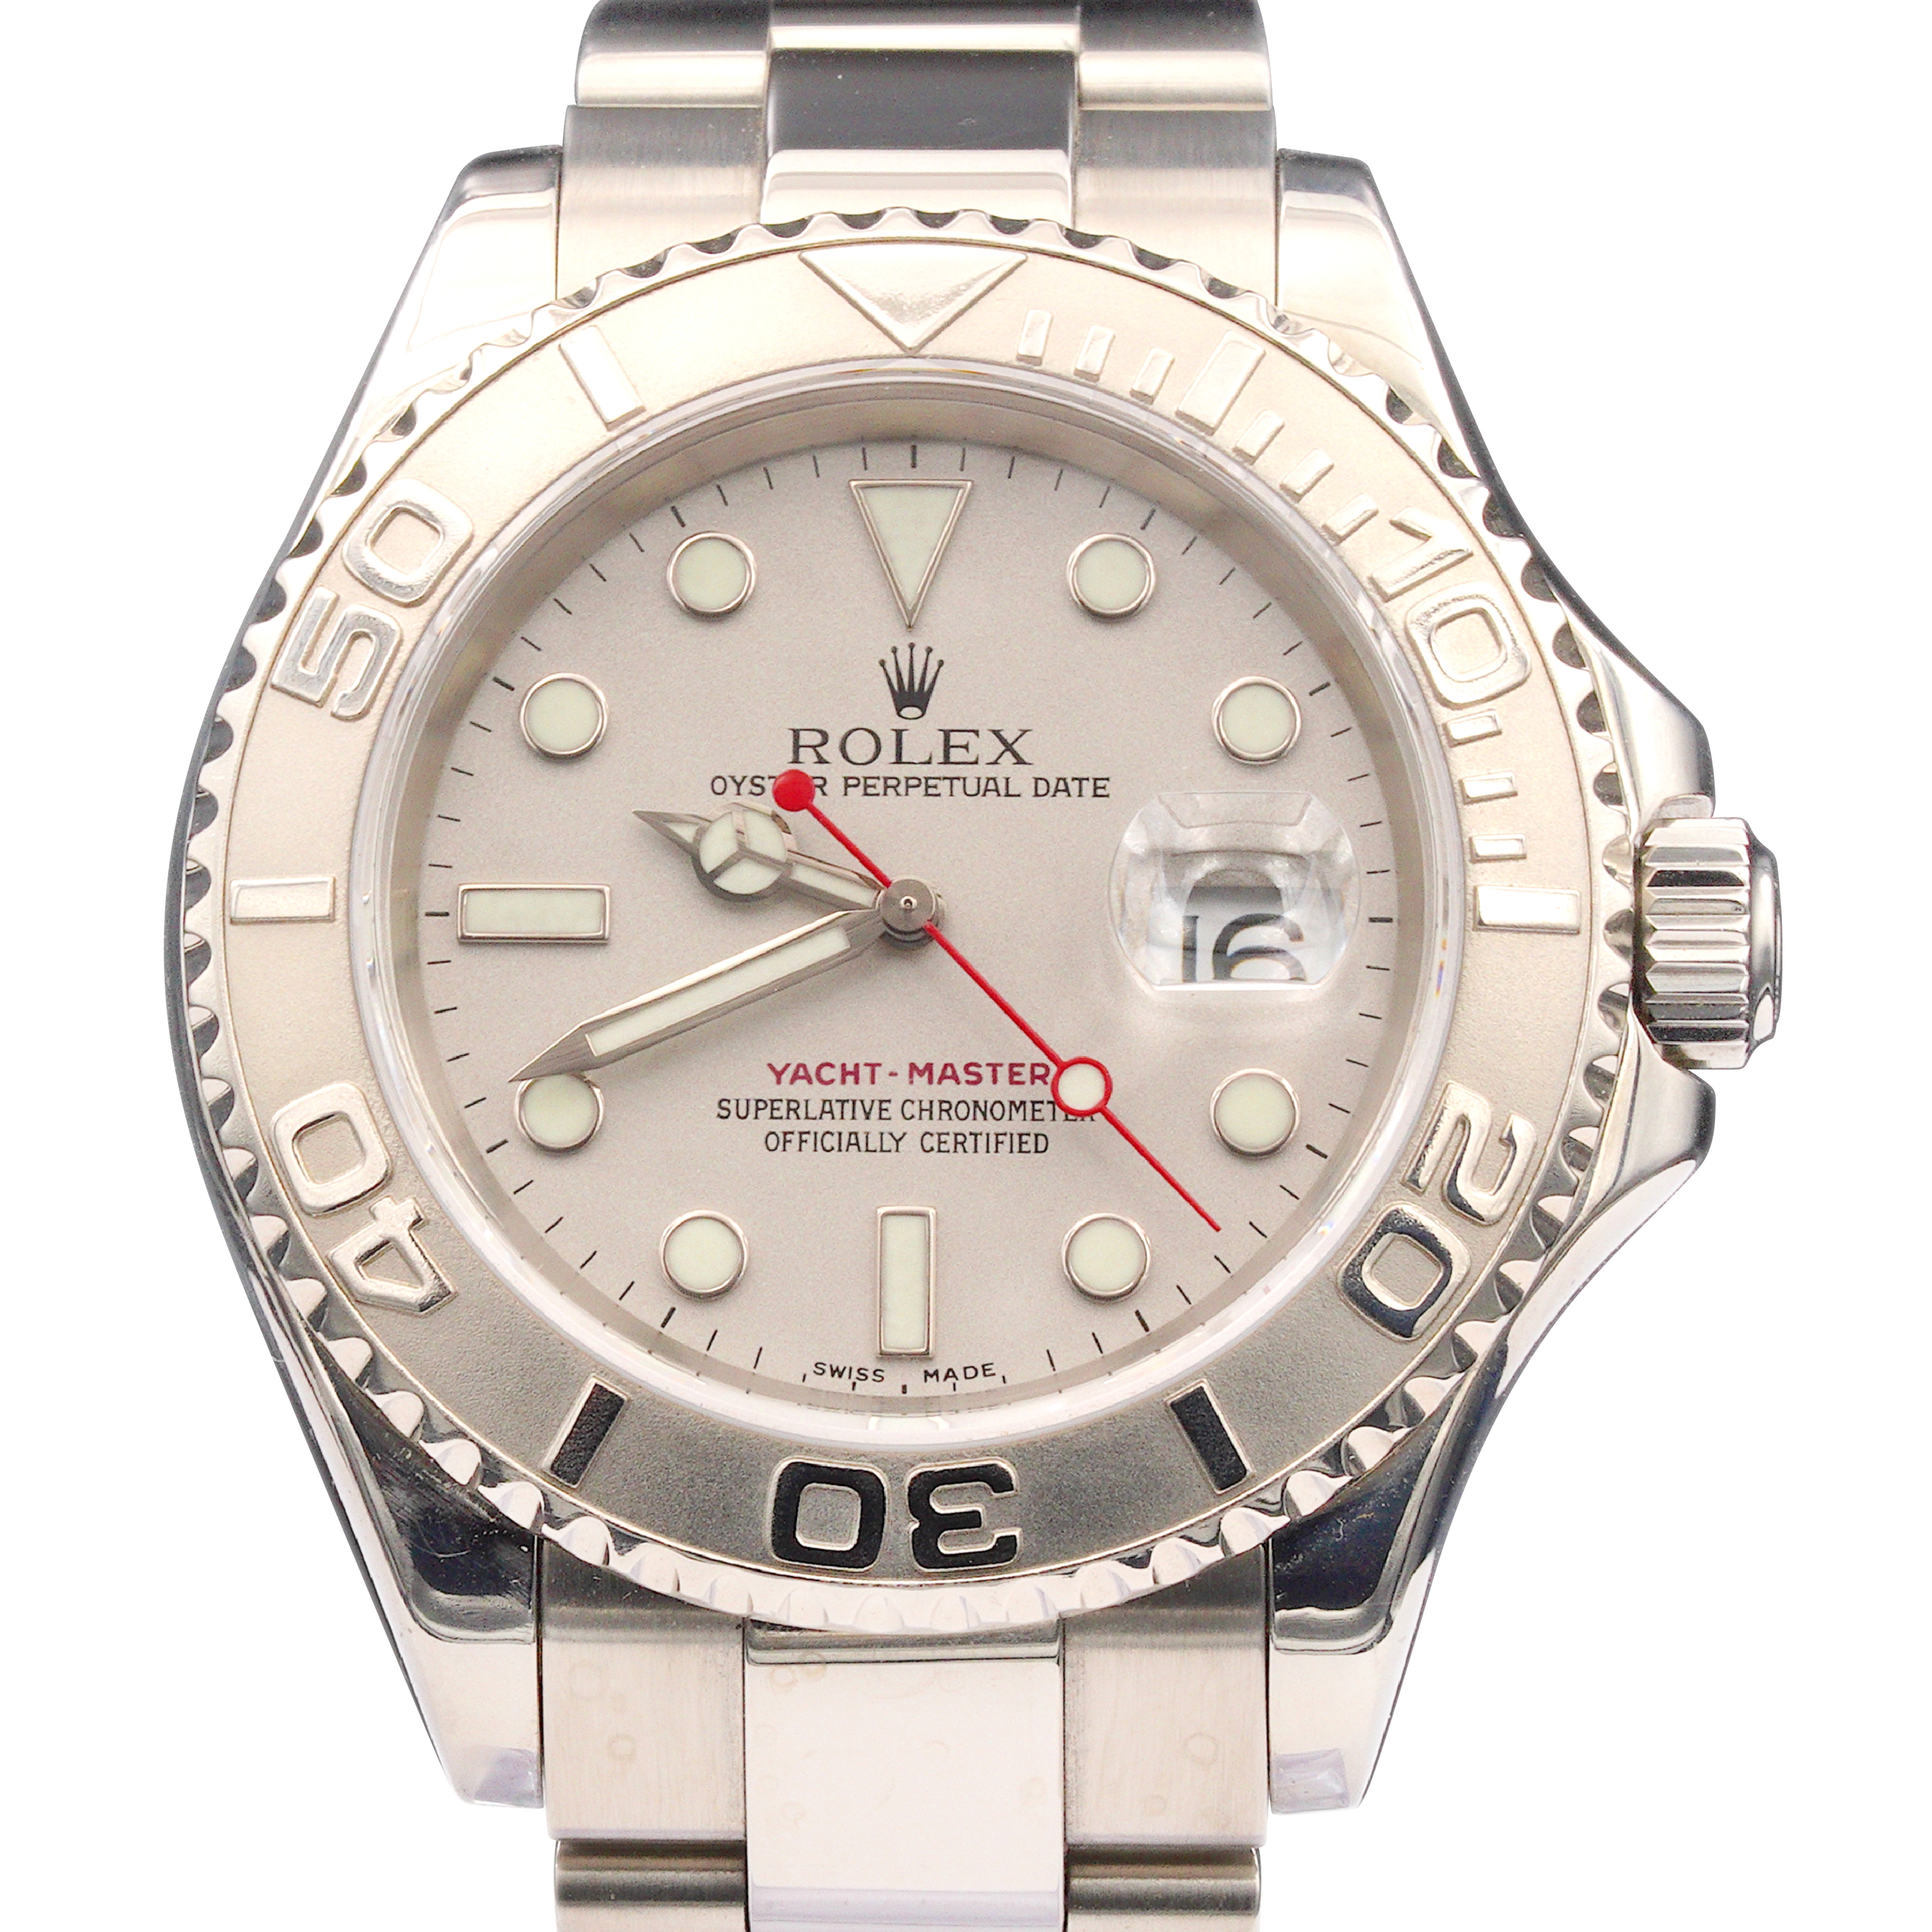 Rolex Yacht-Master II for $31,000 for sale from a Private Seller